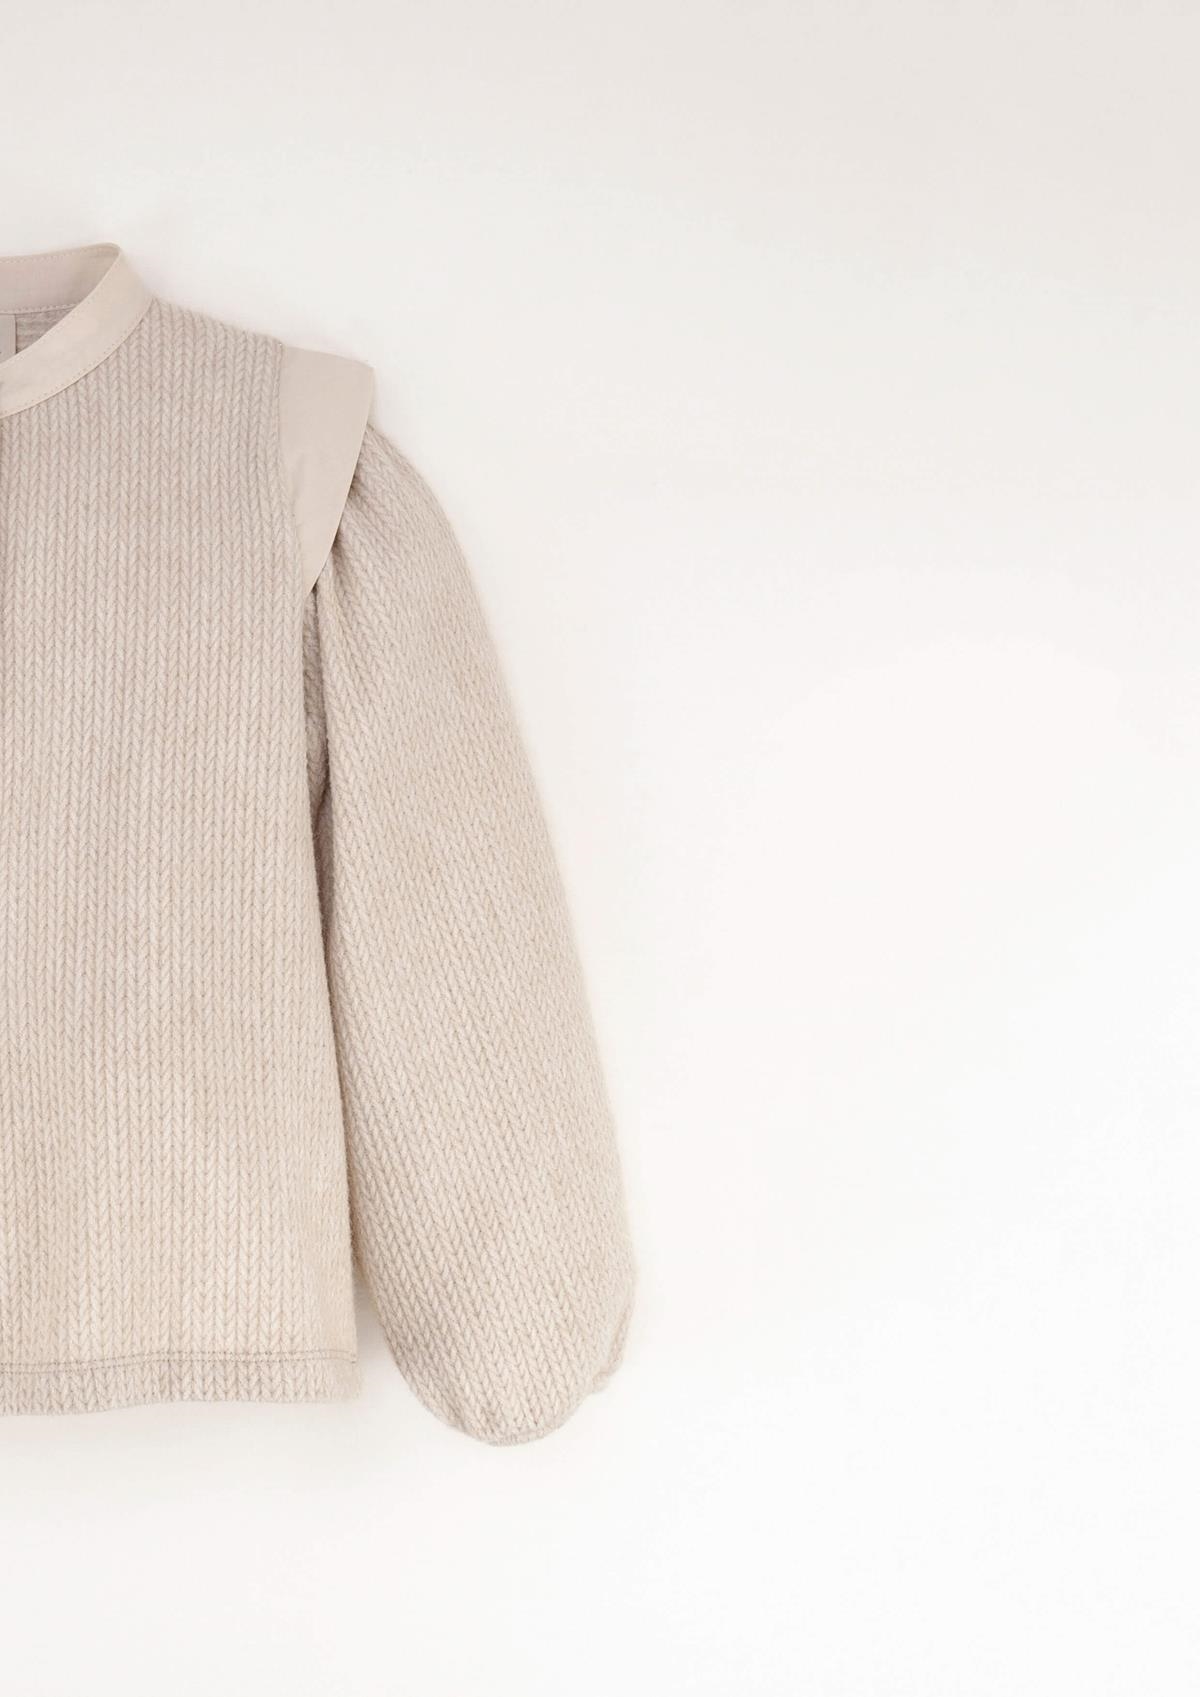 Mod.15.3 Knitted puff sleeve blouse | AW23.24 Mod.15.3 Knitted puff sleeve blouse